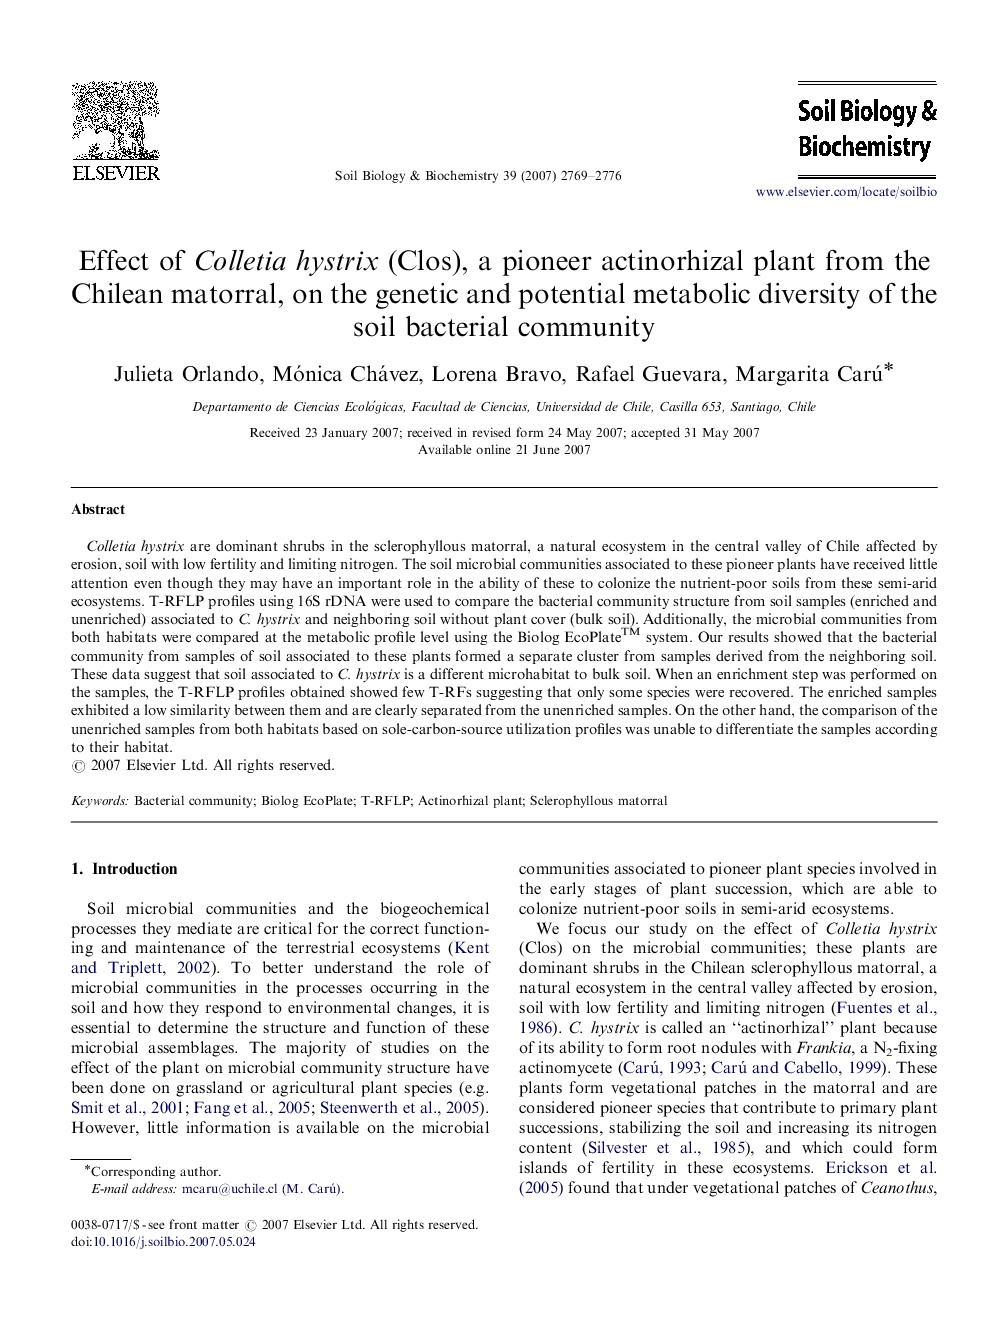 Effect of Colletia hystrix (Clos), a pioneer actinorhizal plant from the Chilean matorral, on the genetic and potential metabolic diversity of the soil bacterial community